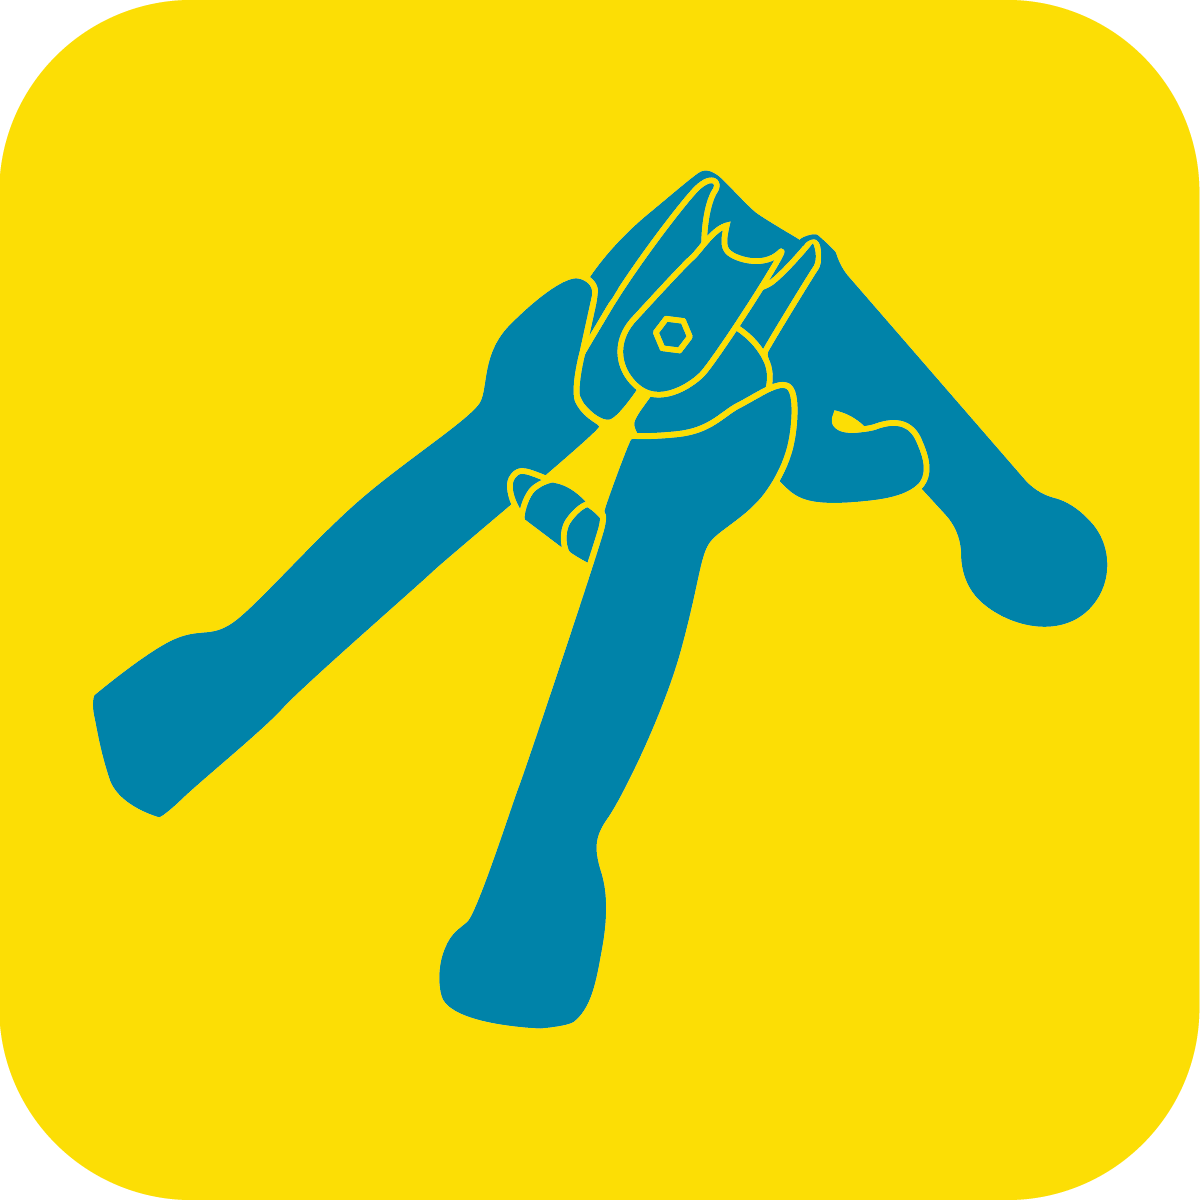 Fence and garden tools icon